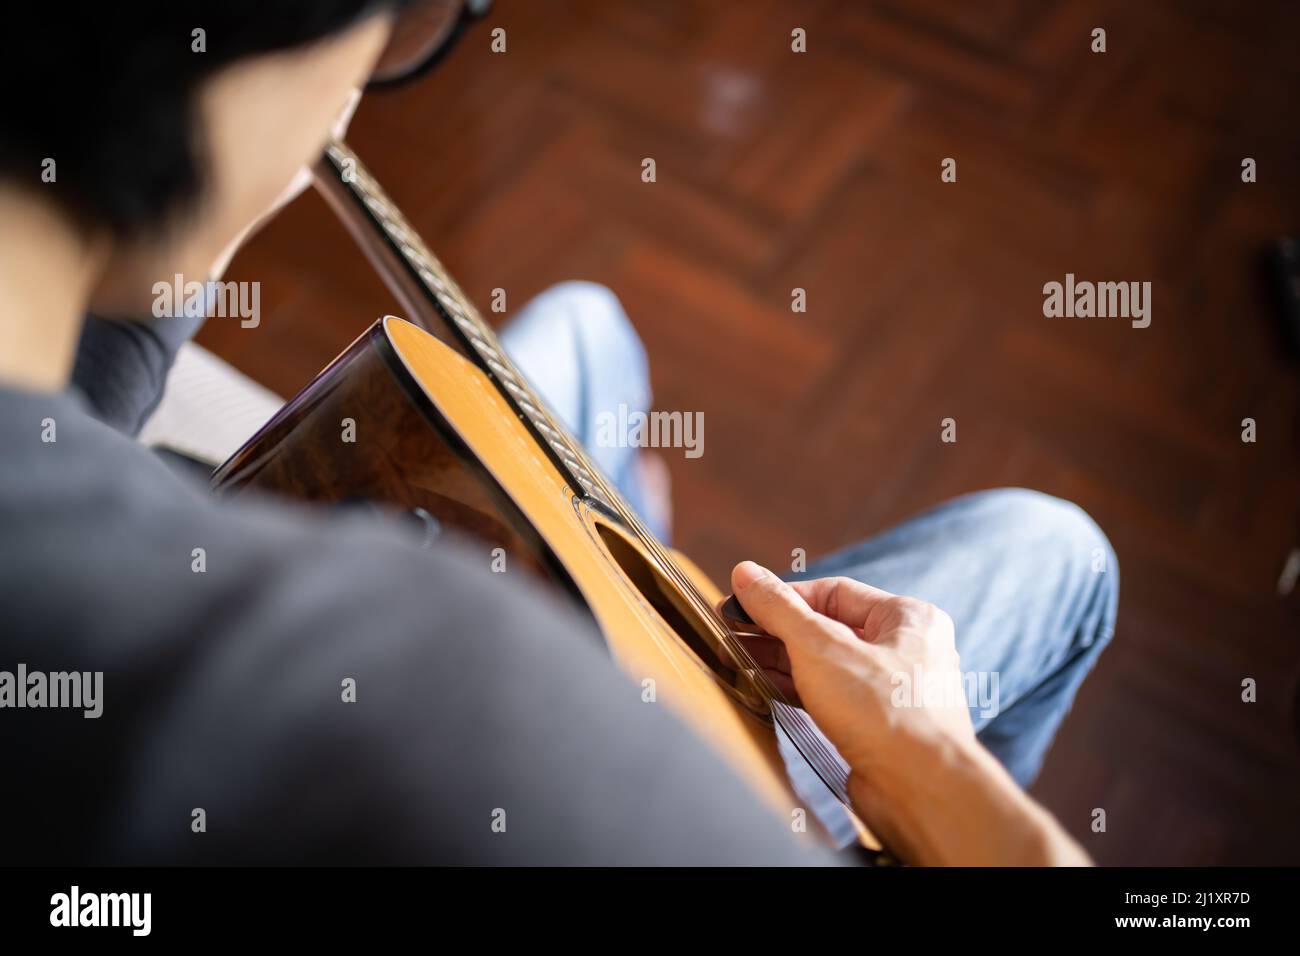 A man playing acoustic guitar Stock Photo